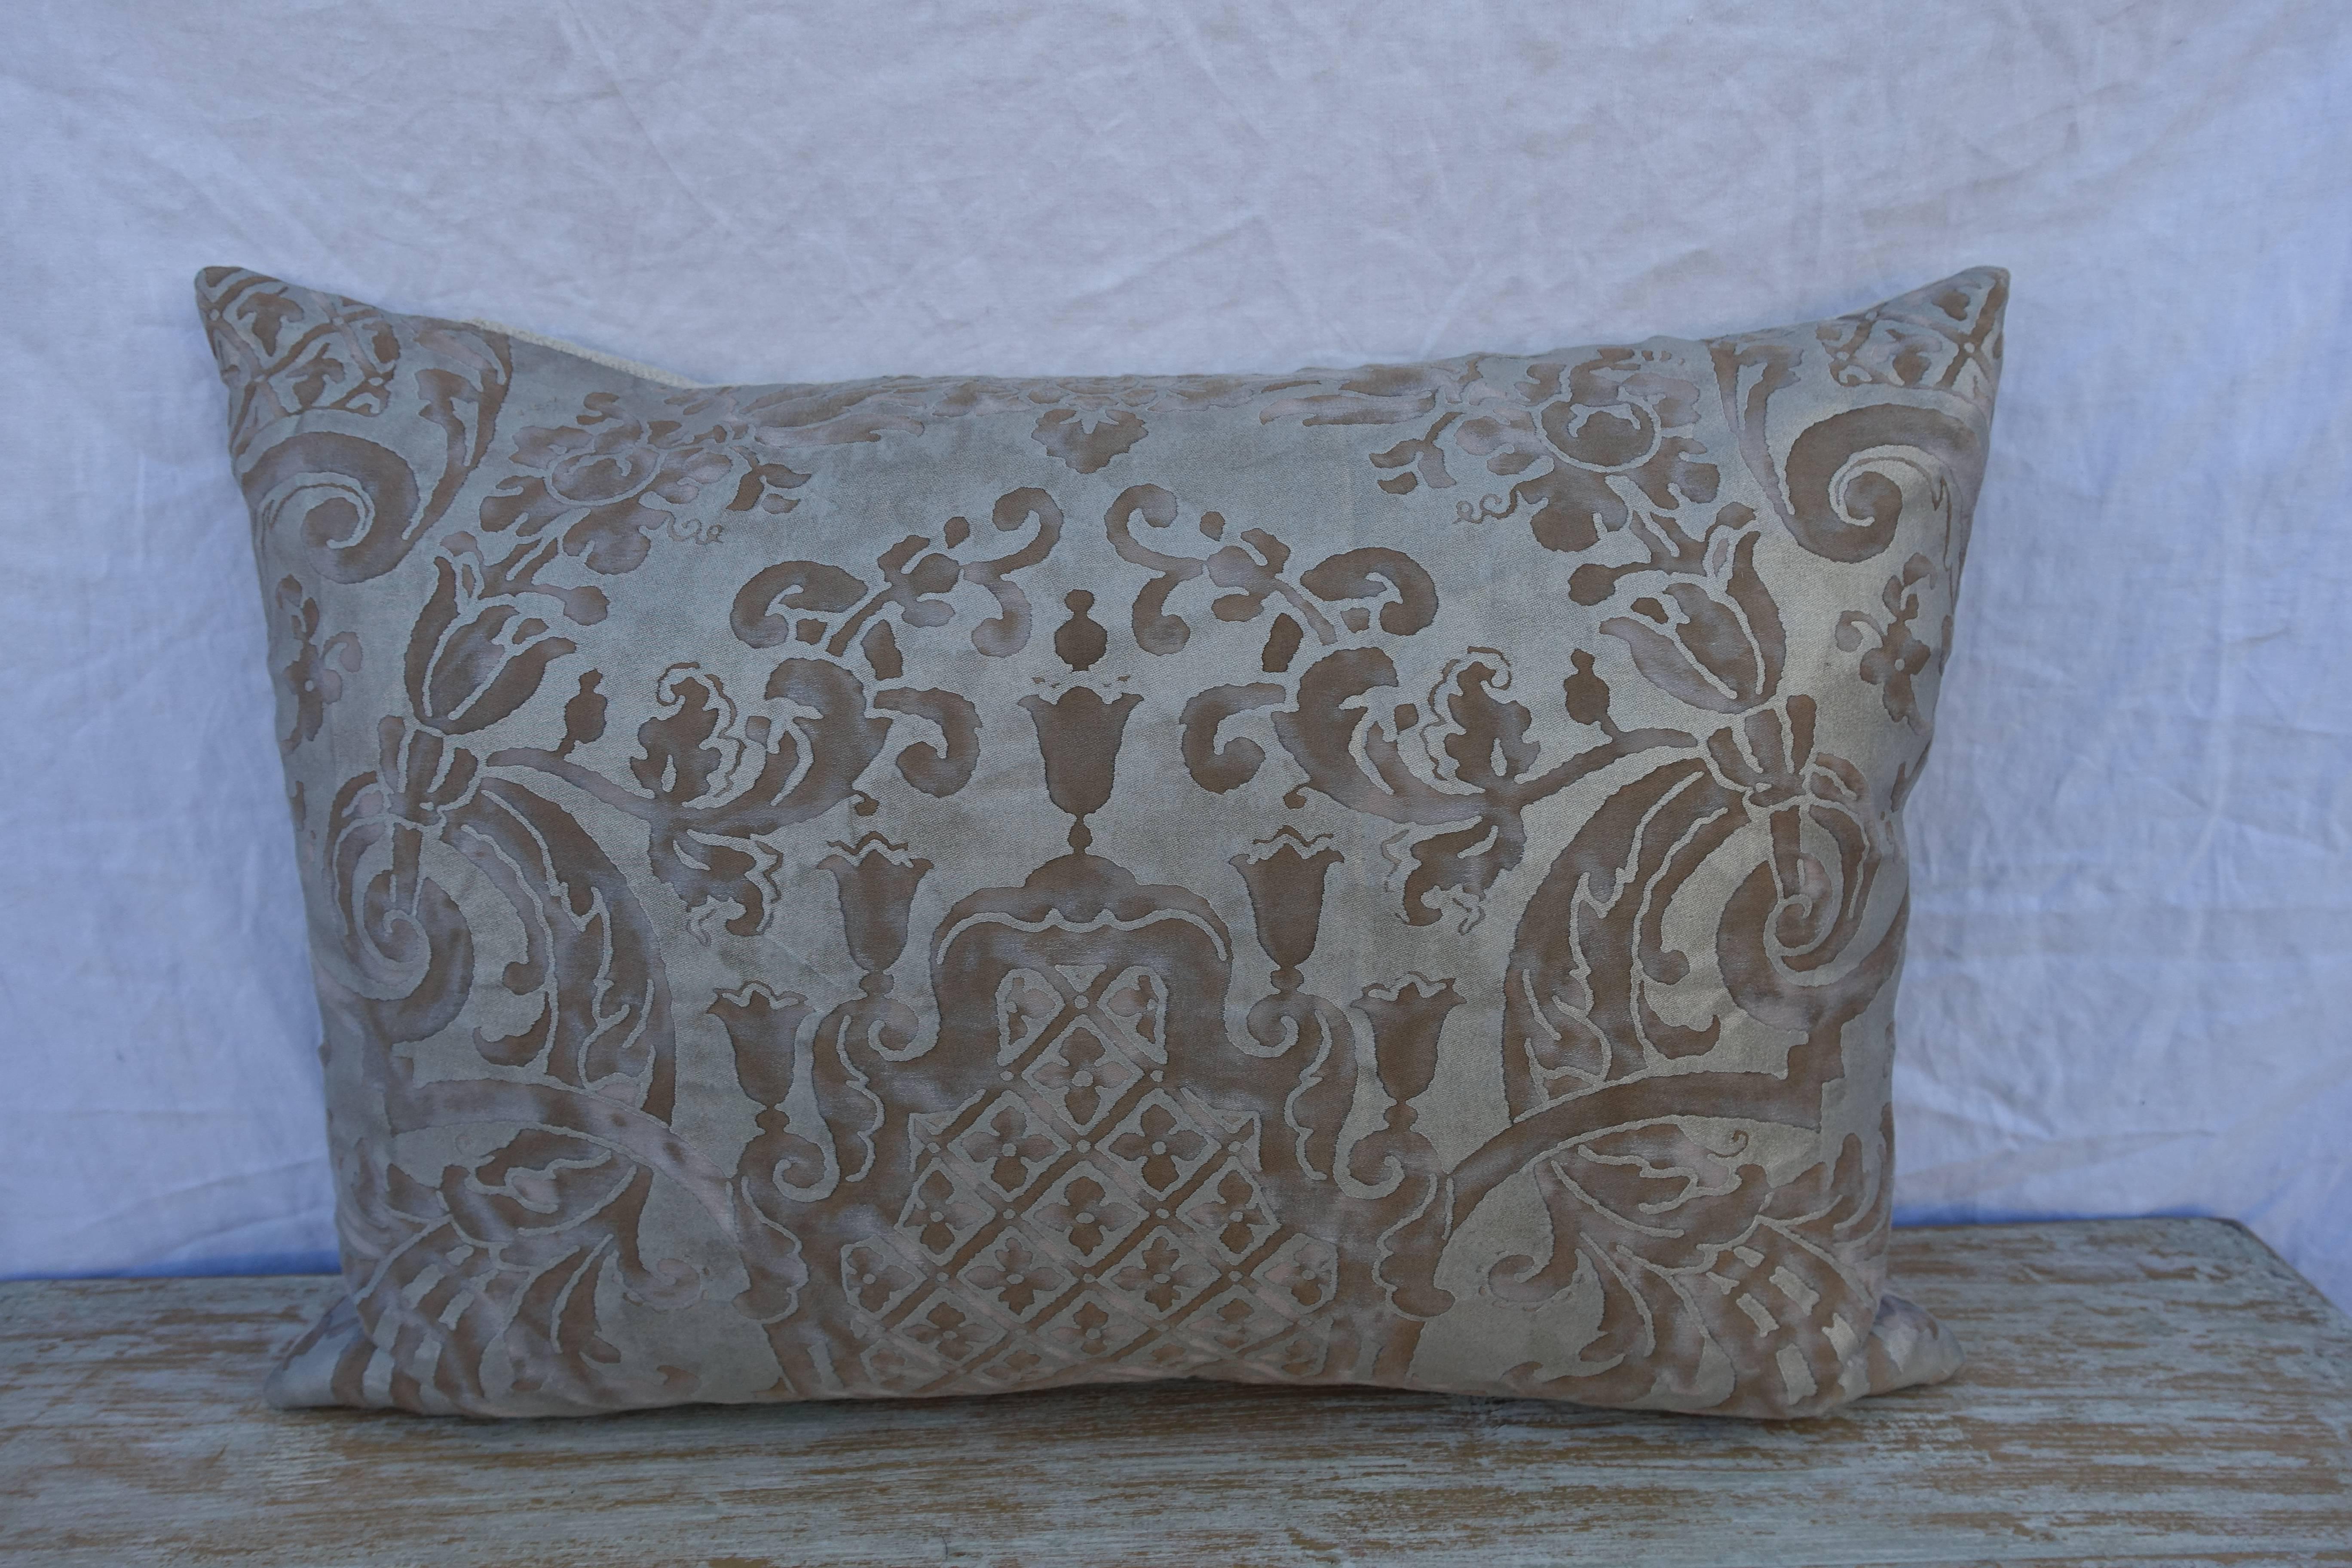 Pair of custom Carnavalet patterned grey and silvery gold fortuny textile pillows with home spun linen backs. Down inserts, sewn closed.